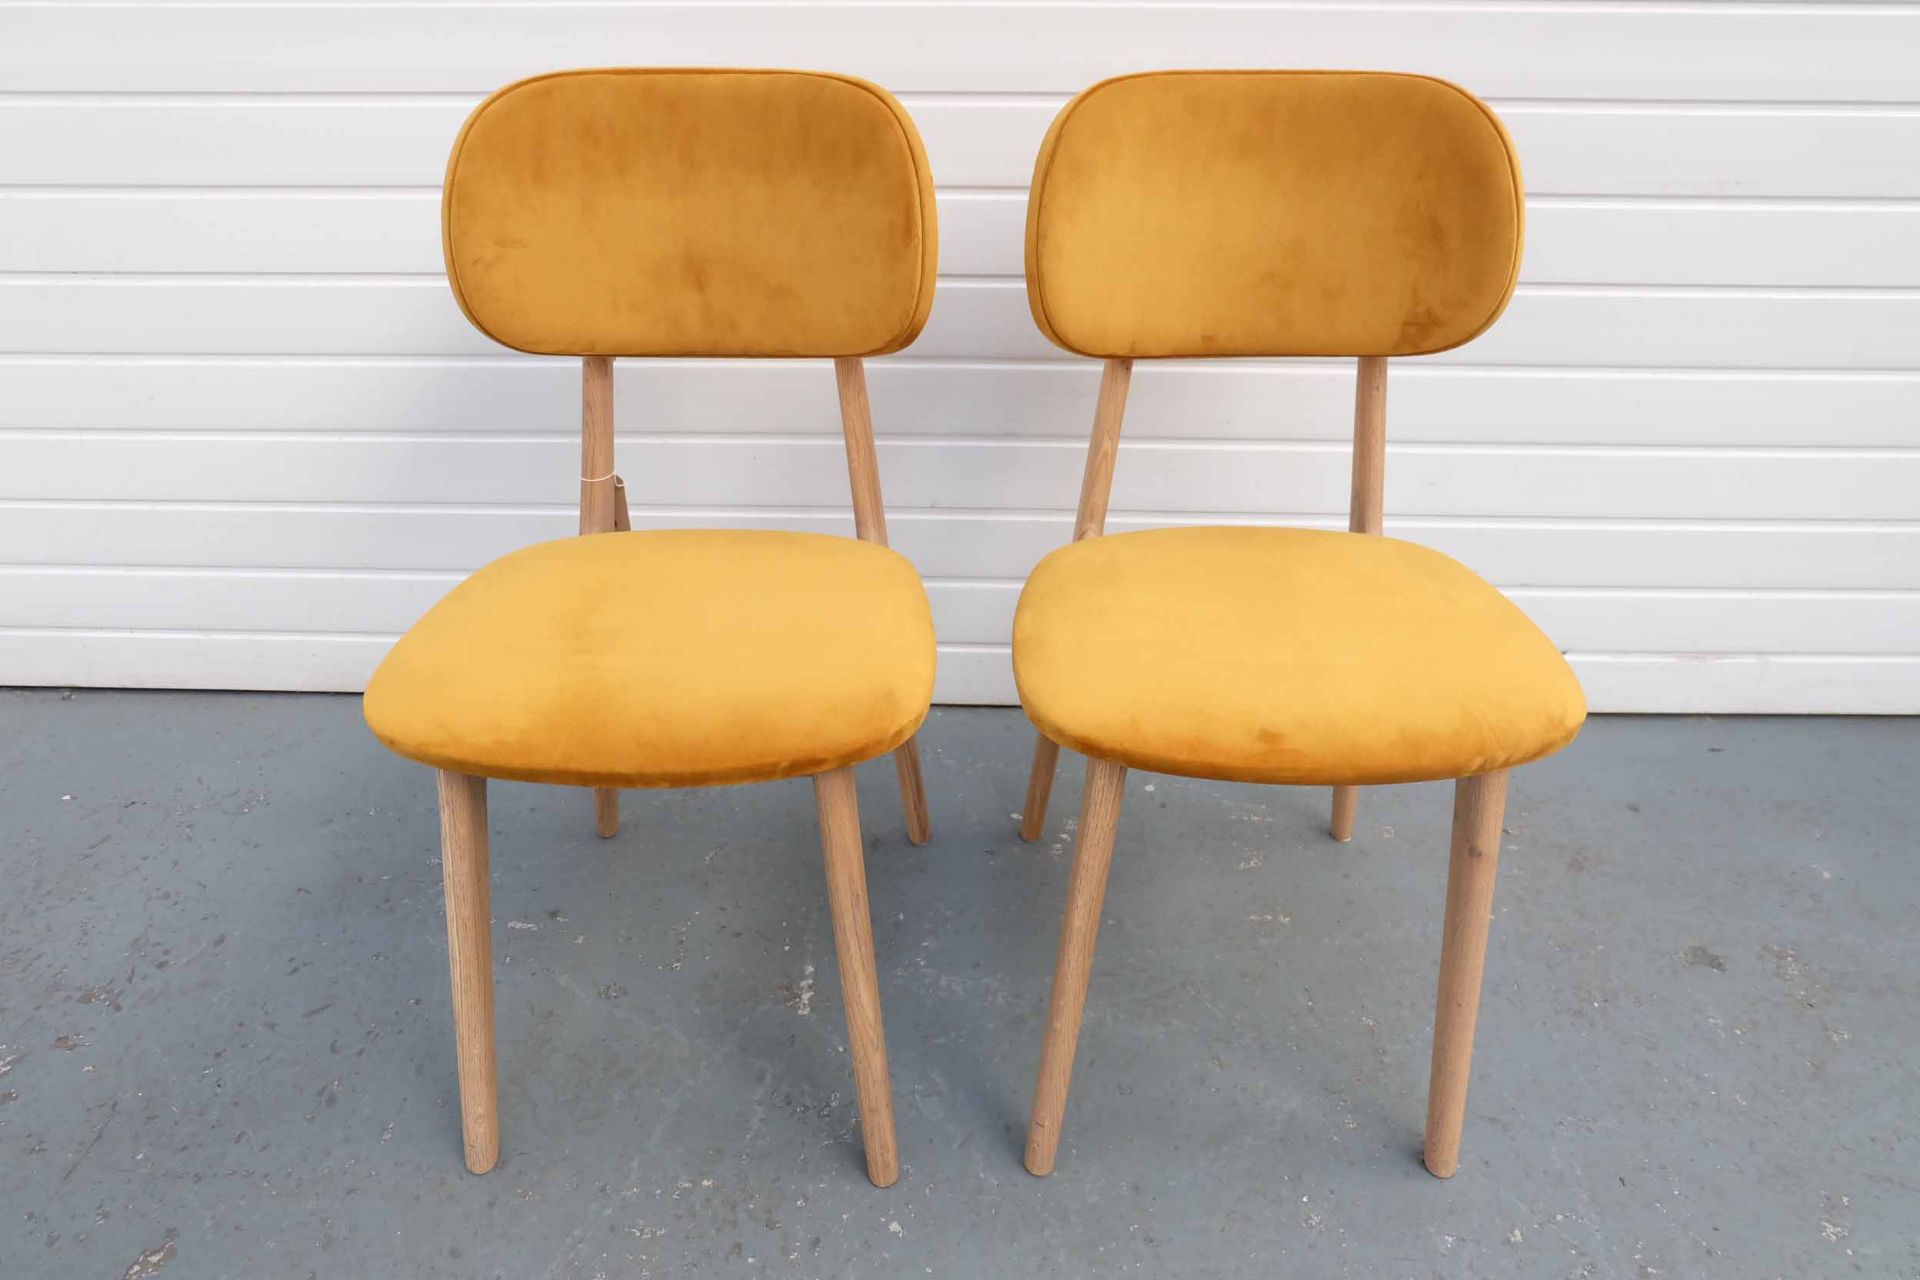 Pair of Carton Furniture 'Bari' Dining Chairs. Upholstered Seat and Back in Mustard Velvet. Fitted o - Image 2 of 6